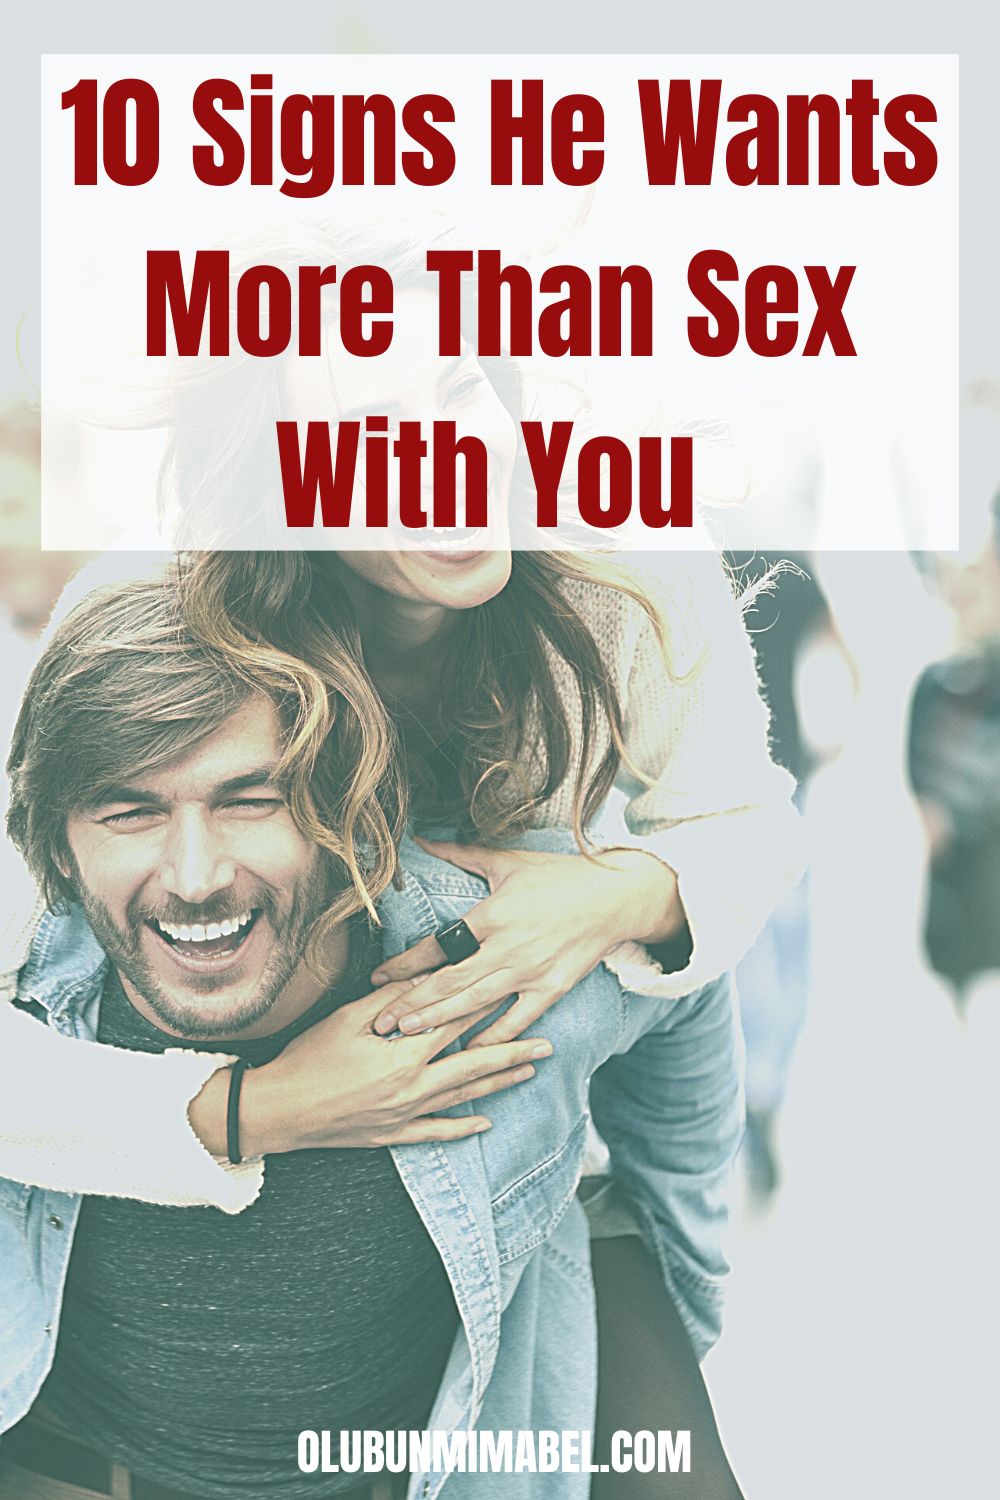 Signs He Wants More Than Sex With You 